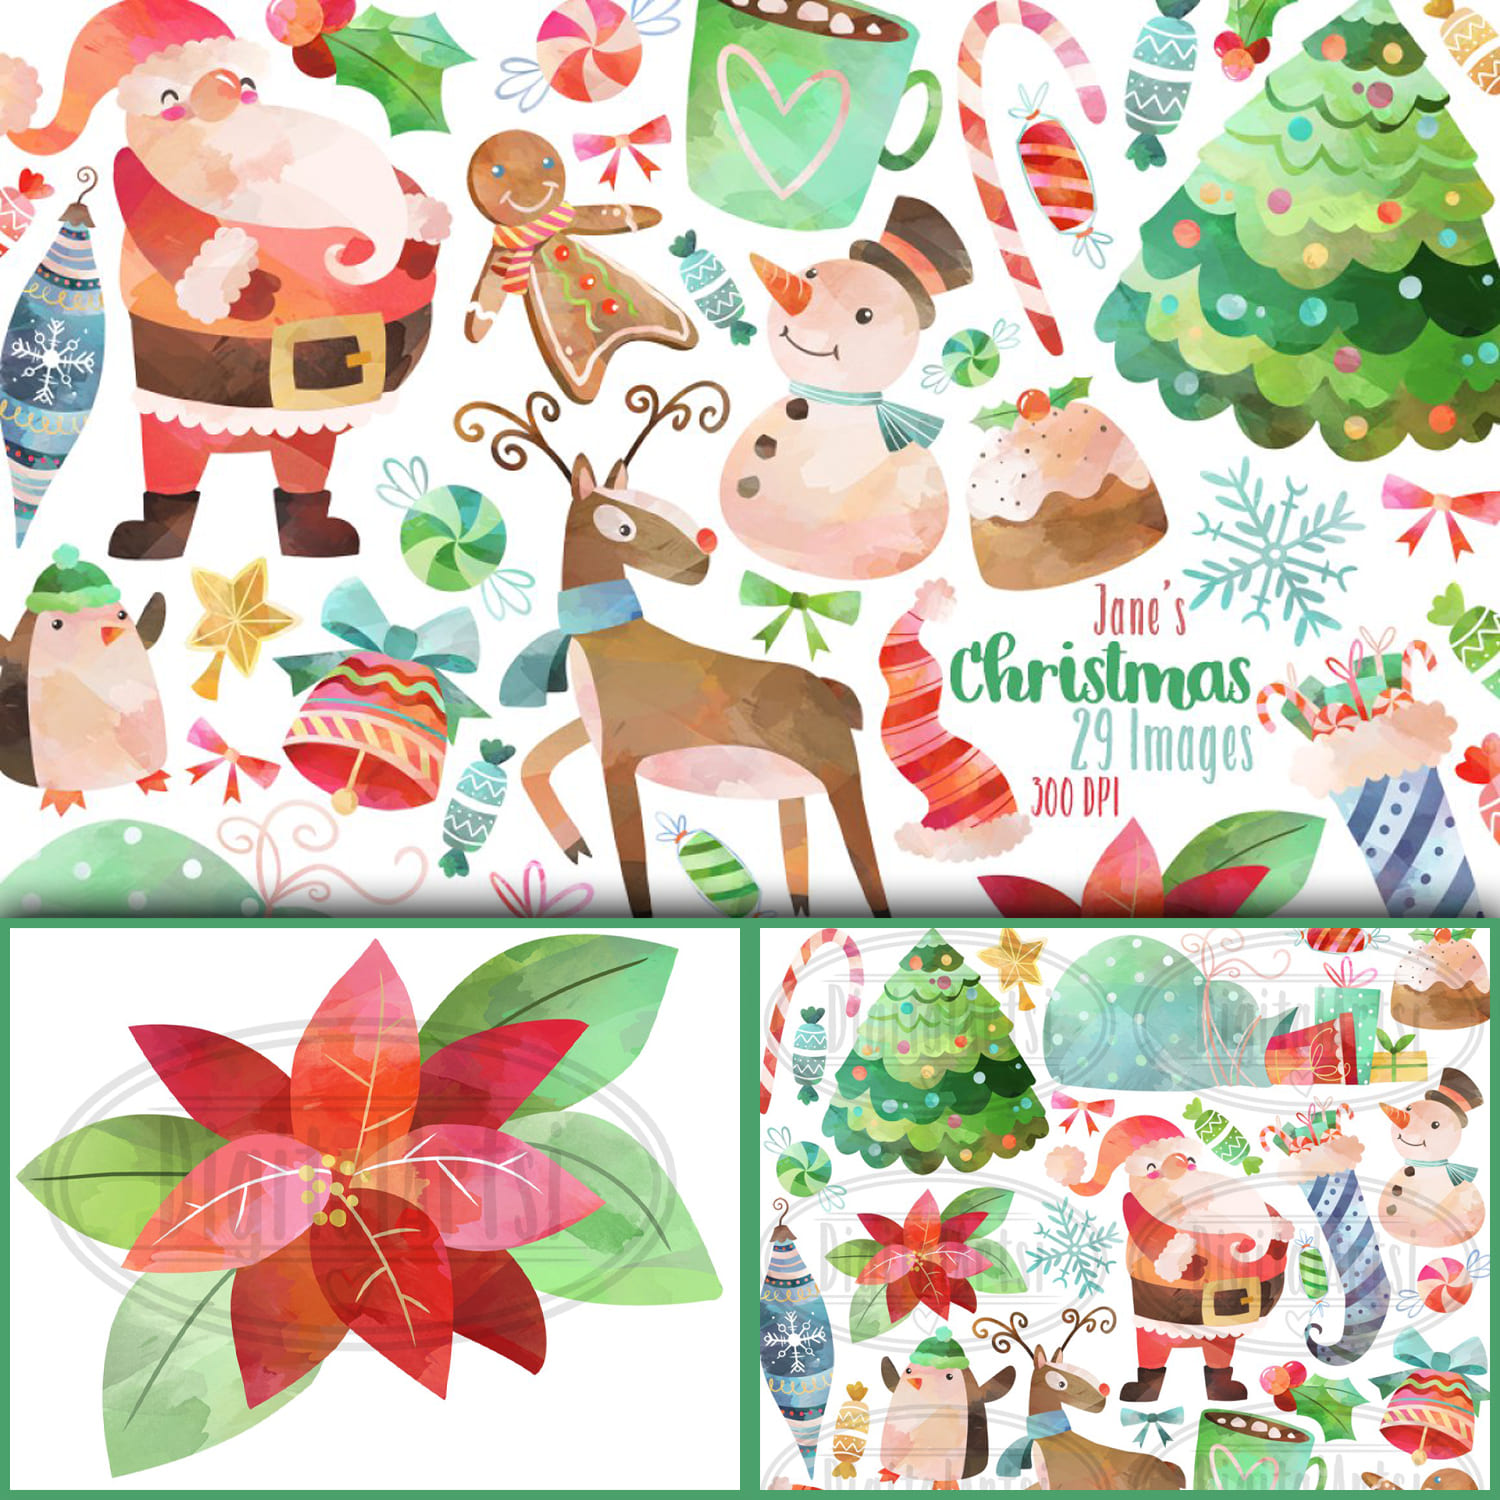 Santa Claus, cookies, candies, Christmas toys to create a Christmas design.